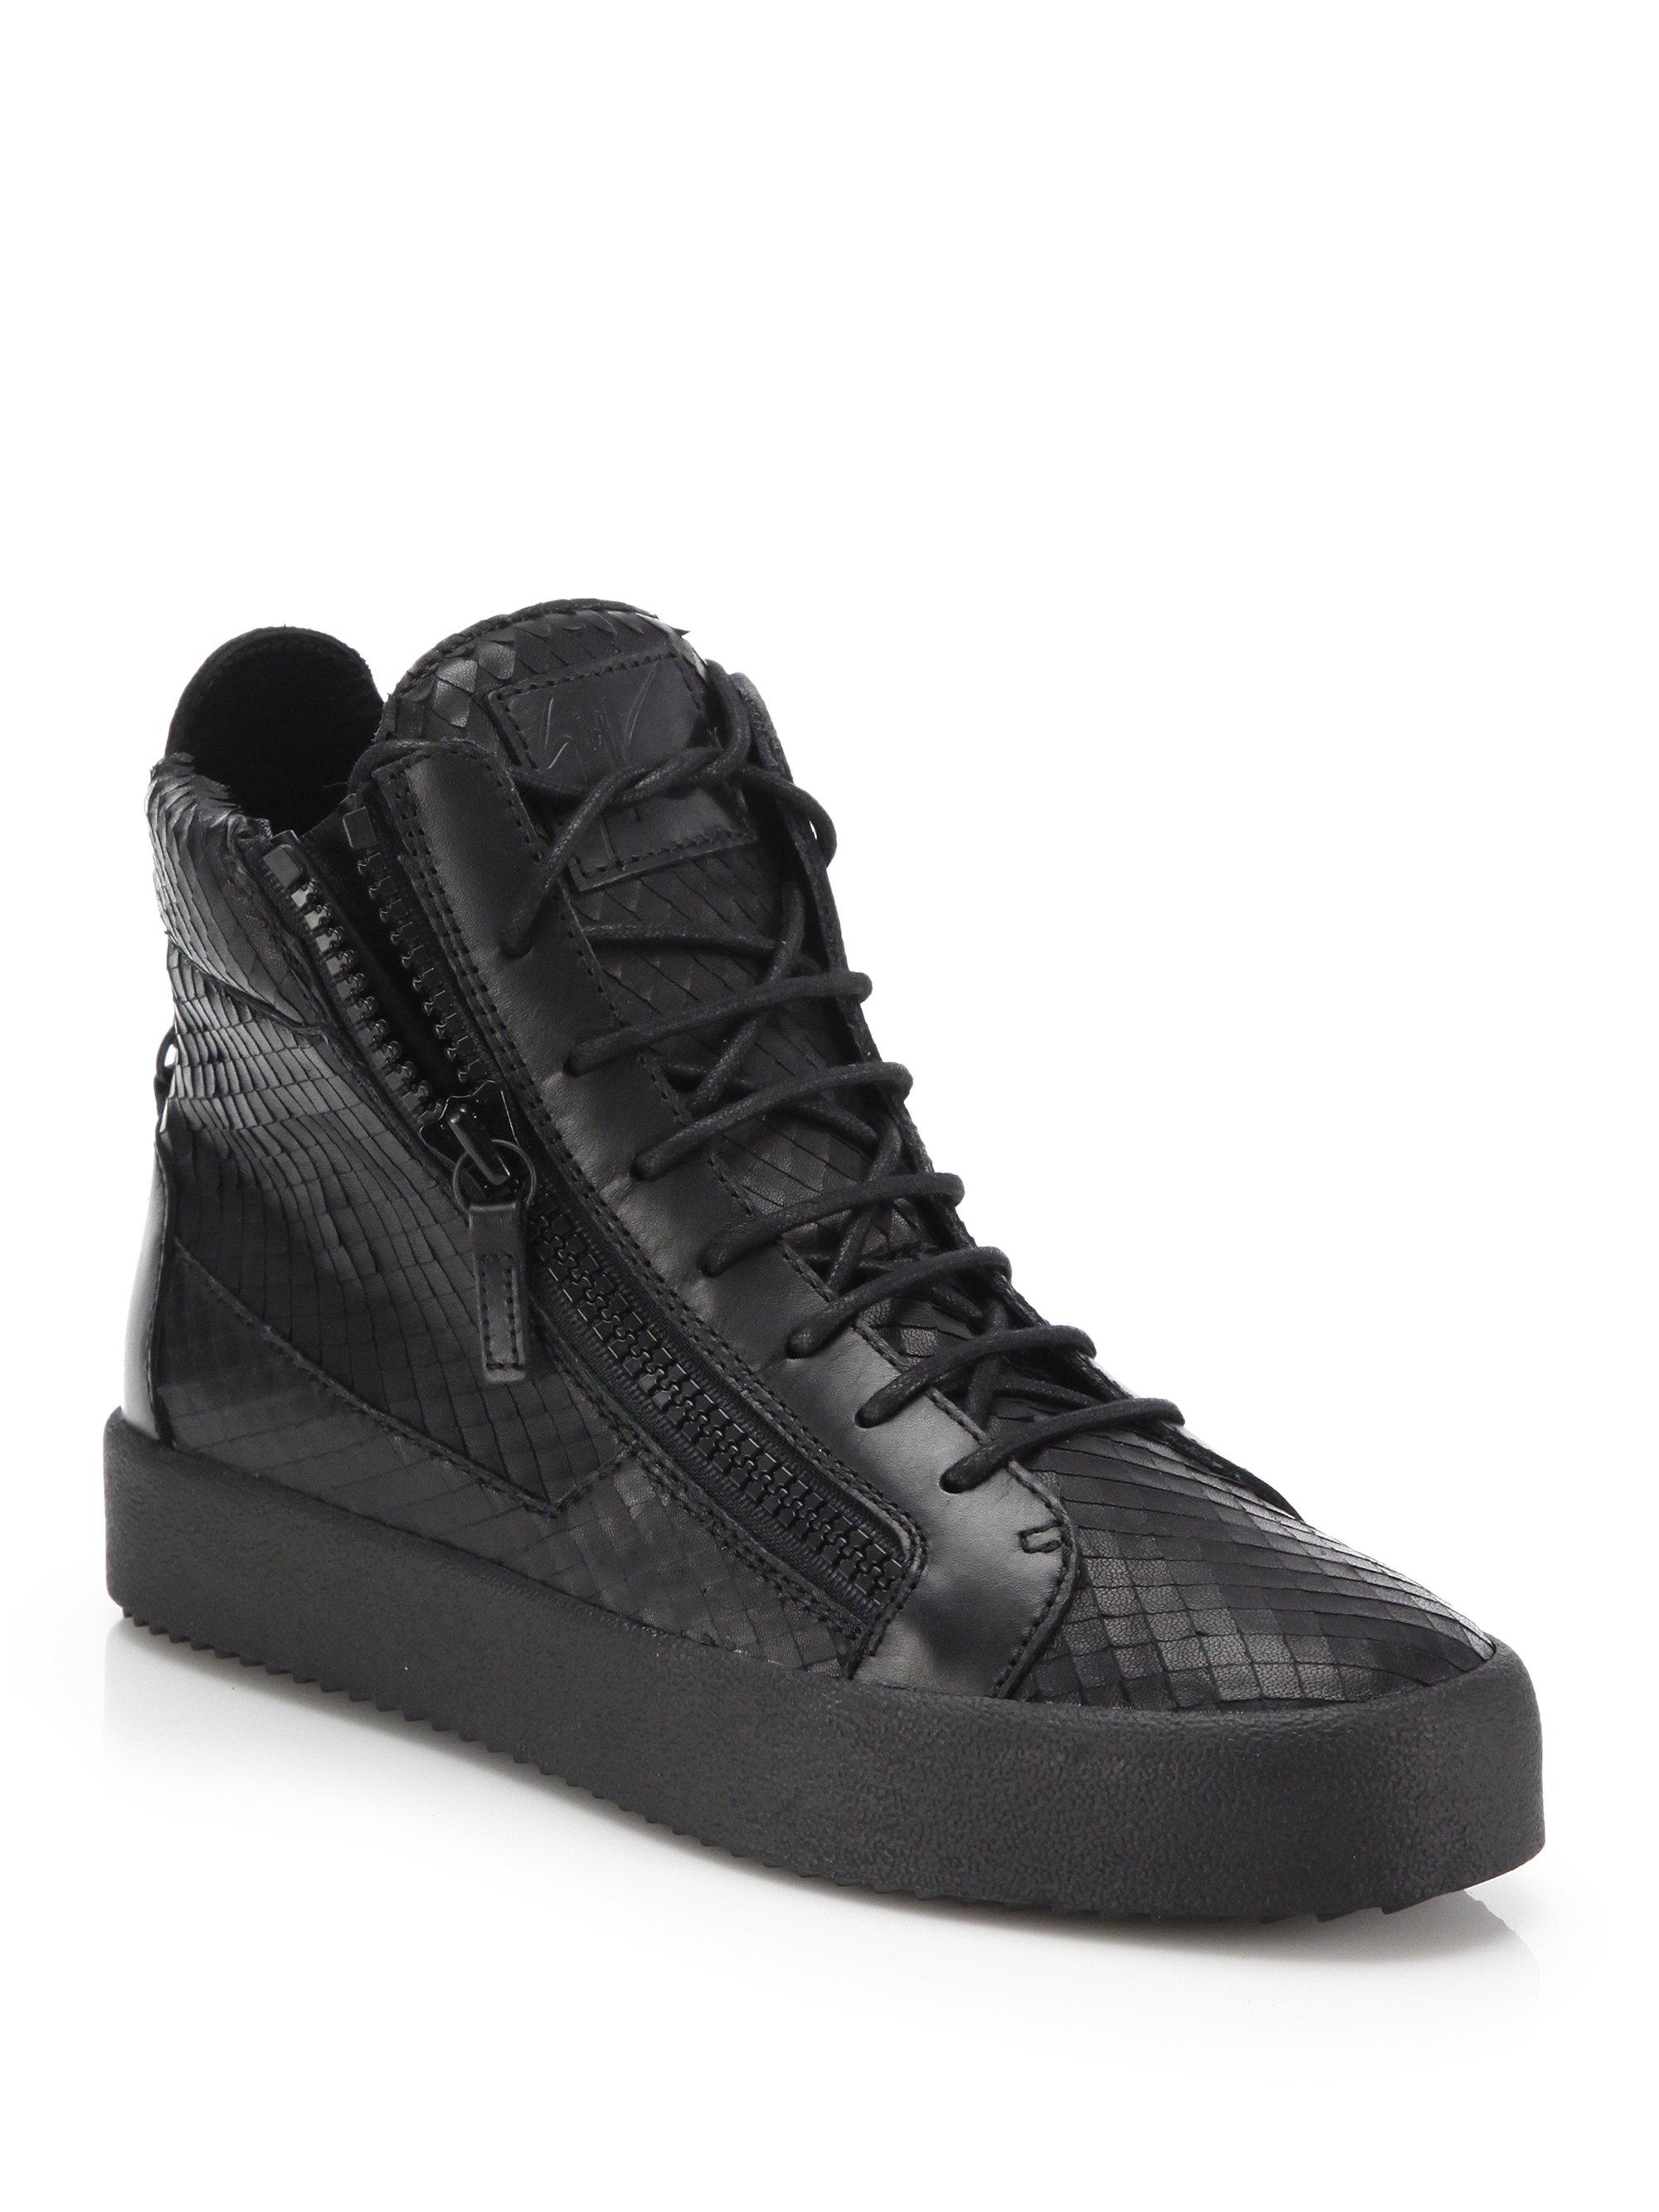 Giuseppe zanotti Snake-Embossed Leather High-Top Sneakers in Black for ...